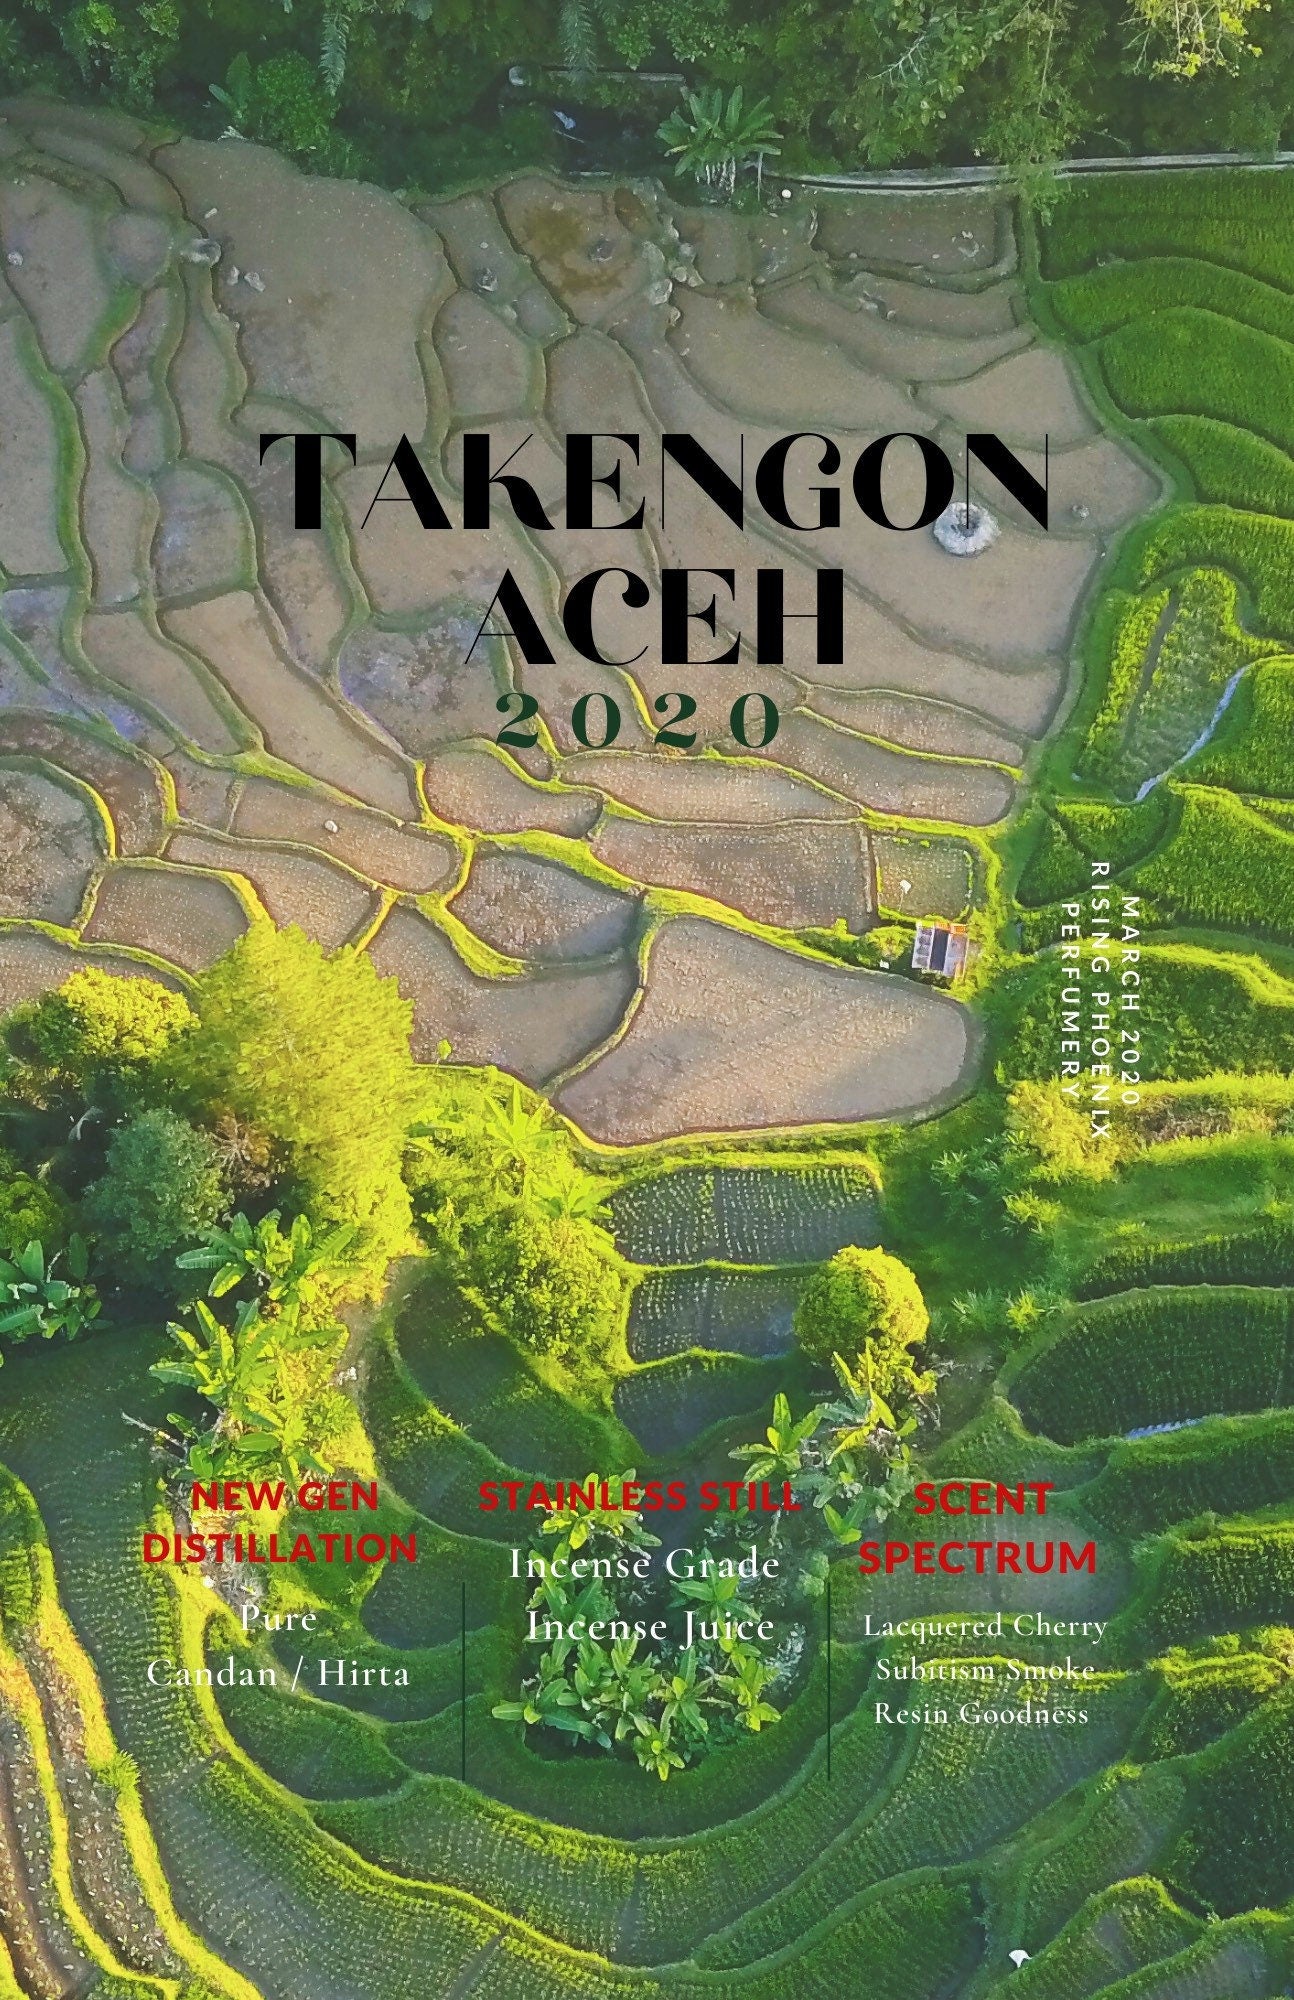 Takengon Aceh 2020 : Central Aceh Province, Sumatra, Indonesia Pure Oud Oil - RisingPhoenixPerfumery.com